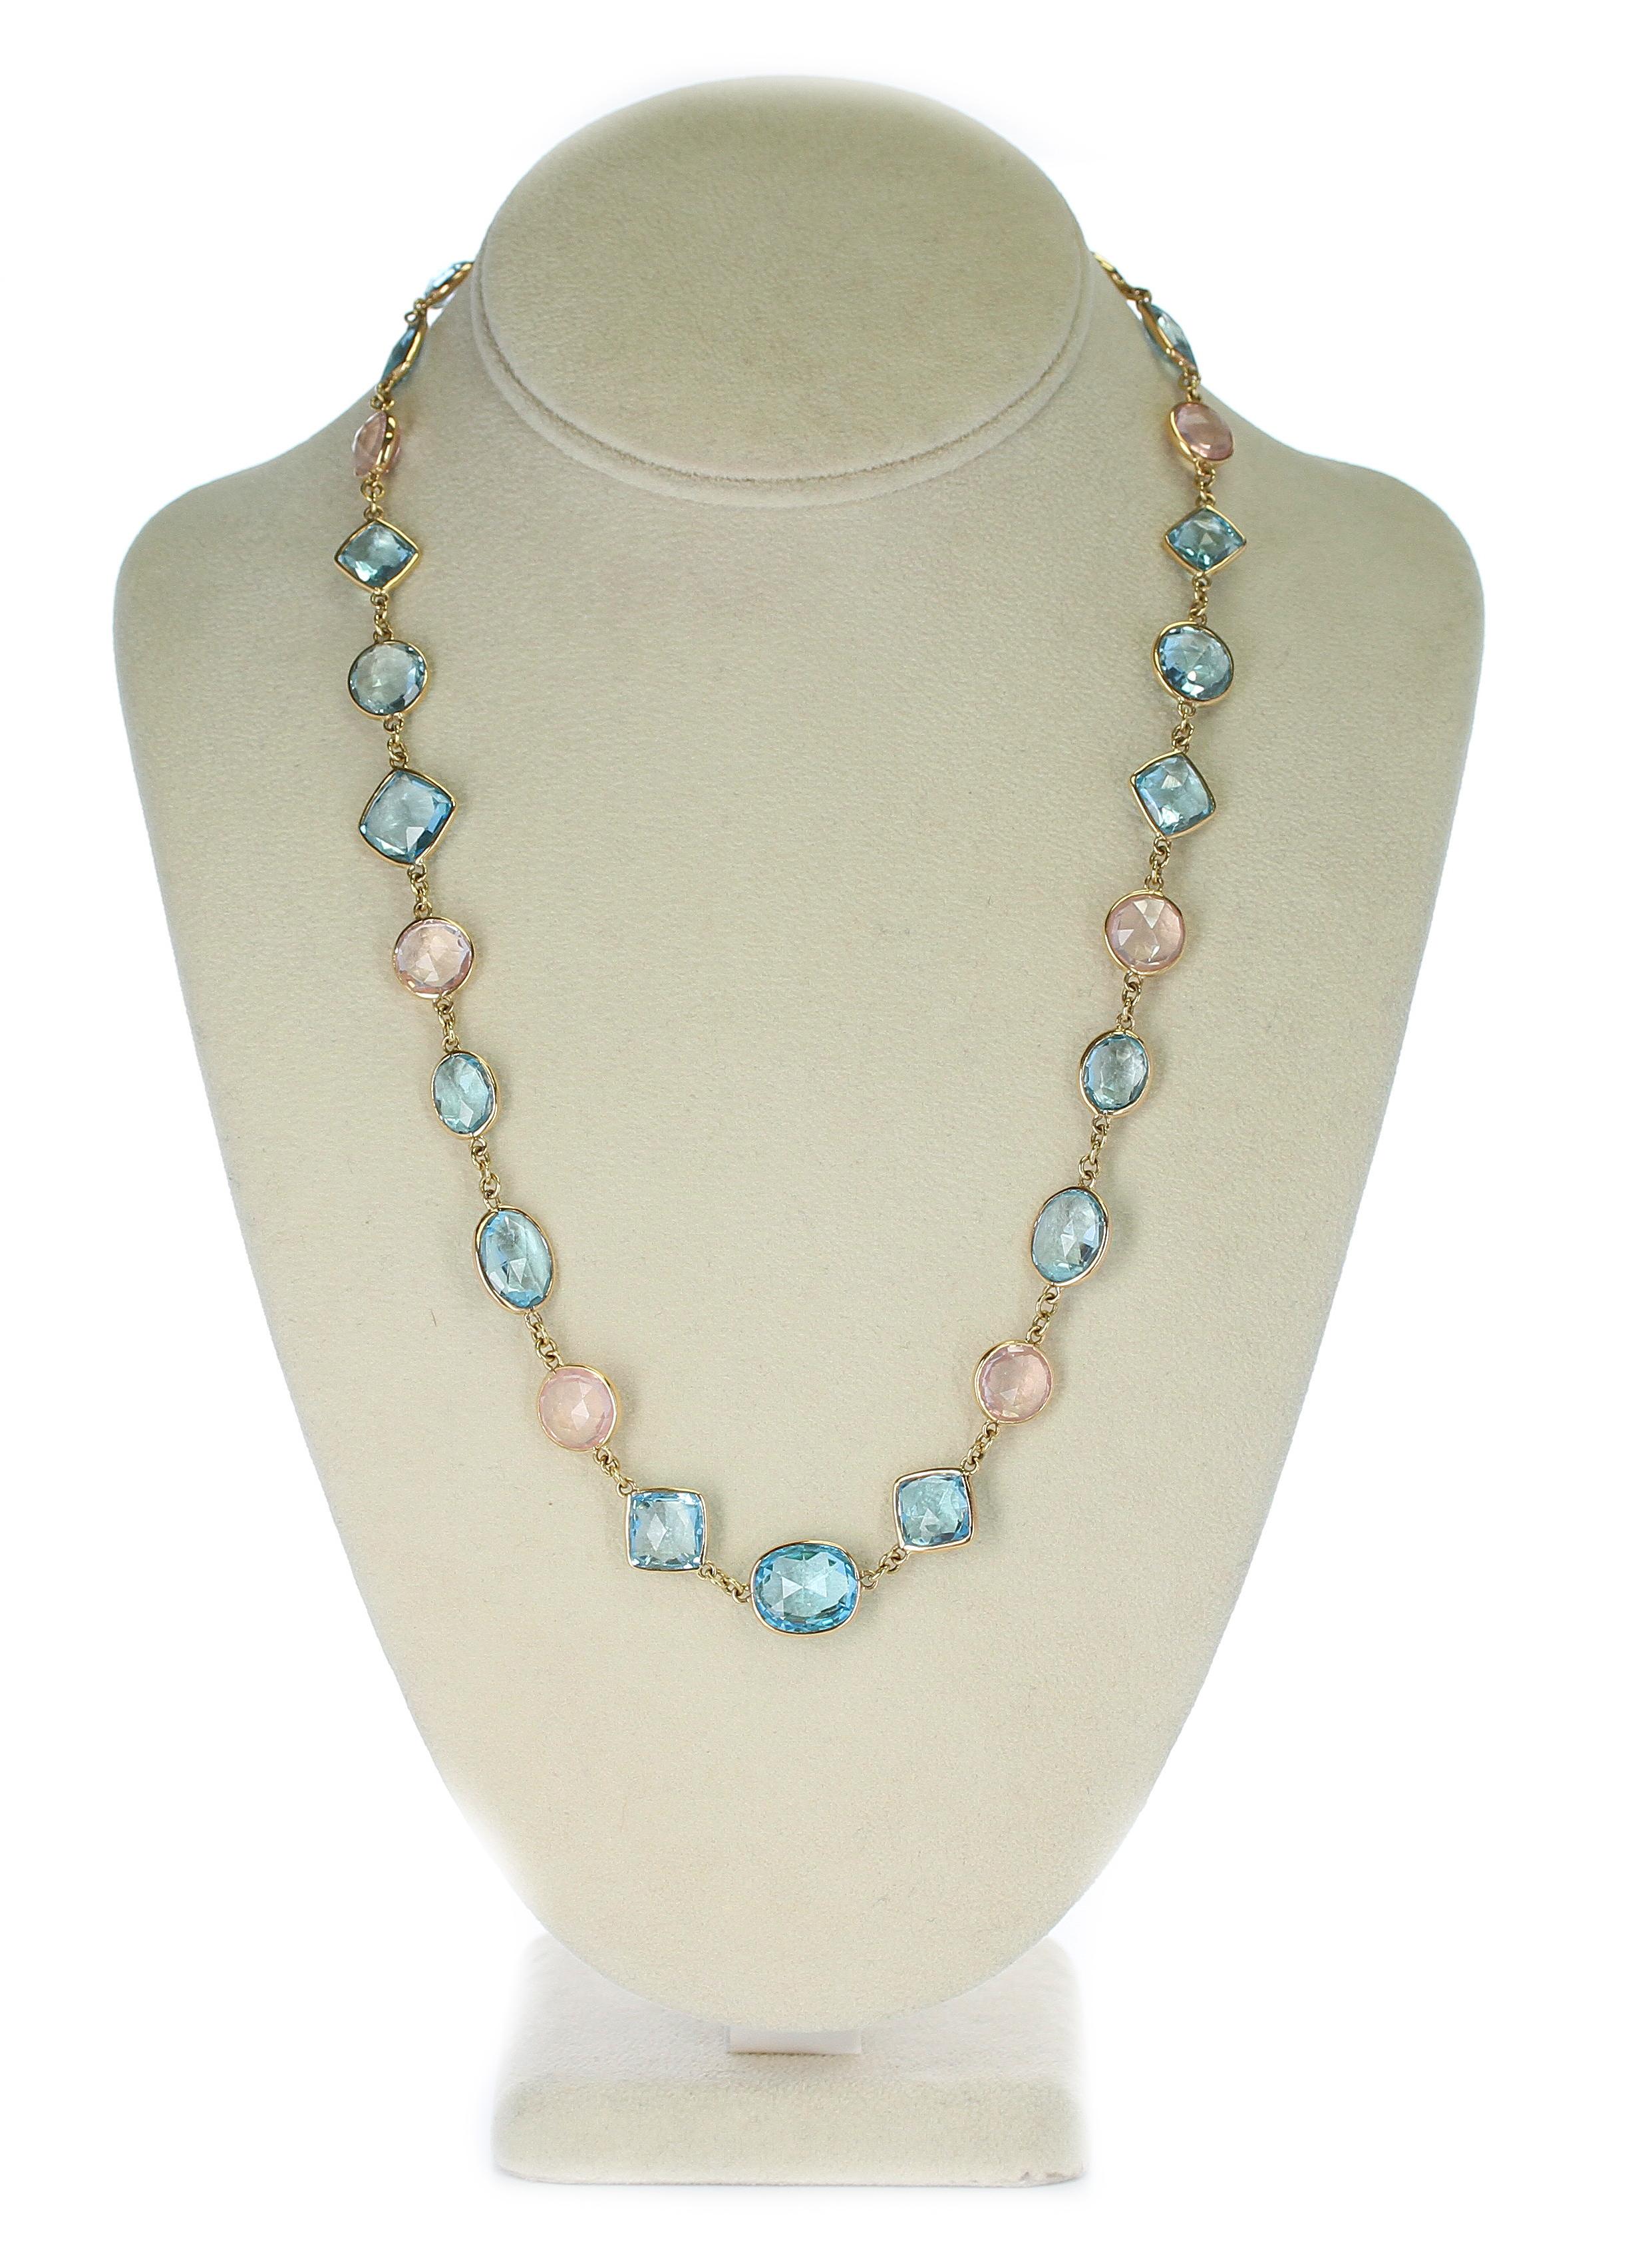 A fine 18K Yellow Gold Necklace with faceted Double Cabochon Rose Cut round-shaped Rose Quartz and Oval & Diamond Shaped Blue Topaz. Length: 21.5 Inches, Weight: 200 carats, 750 Stamped.